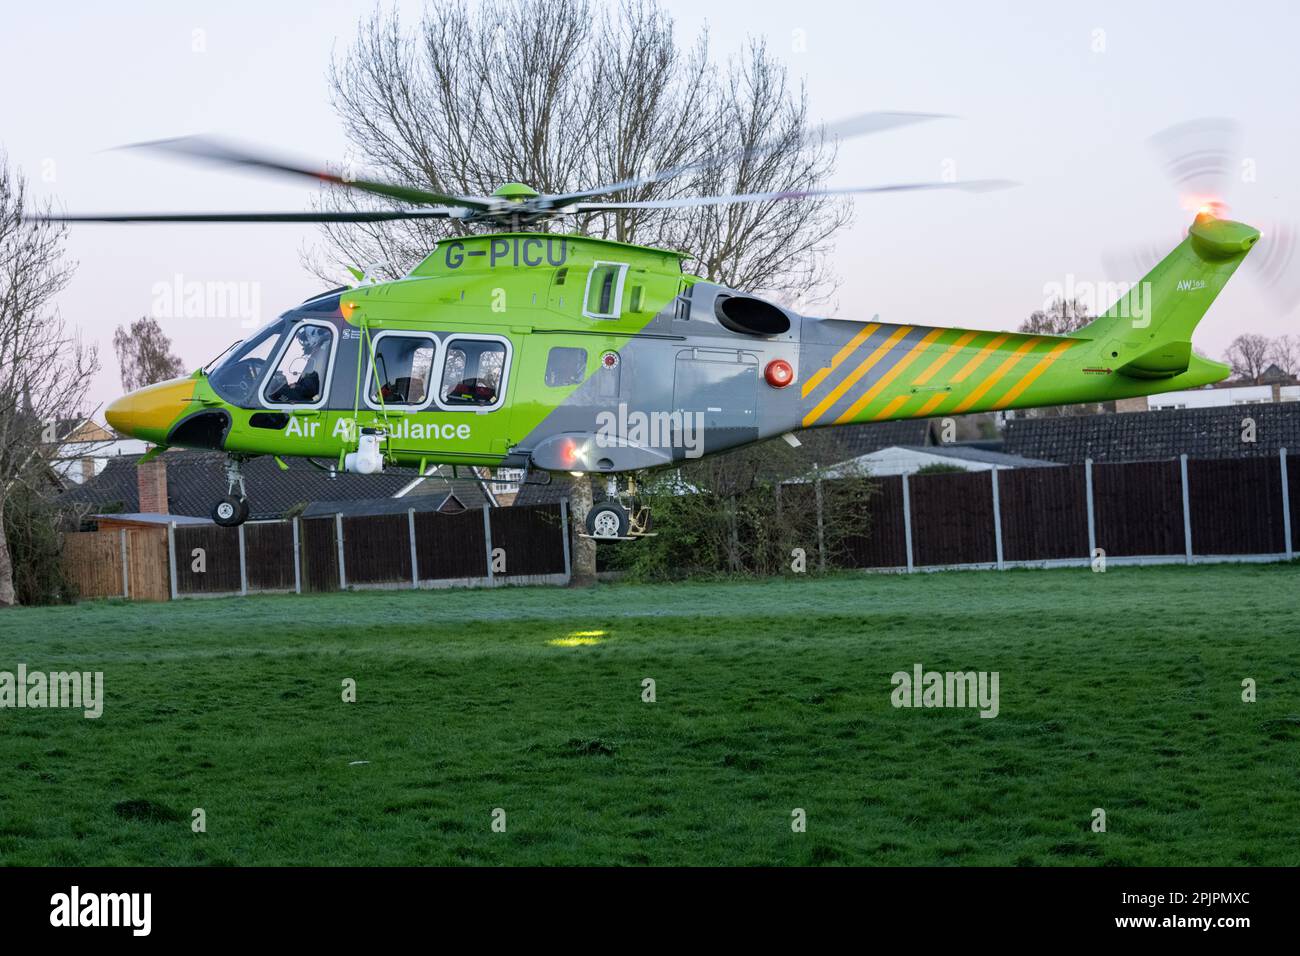 Brentwood, UK. 03rd Apr, 2023. Brentwood Essex 3rd Apr.2023 The Essex and Herts Air Ambulance helicopter (G-PICU Leonardo AW169) was called to assist with a medical emergency in Brentwood Essex Credit: Ian Davidson/Alamy Live News Stock Photo